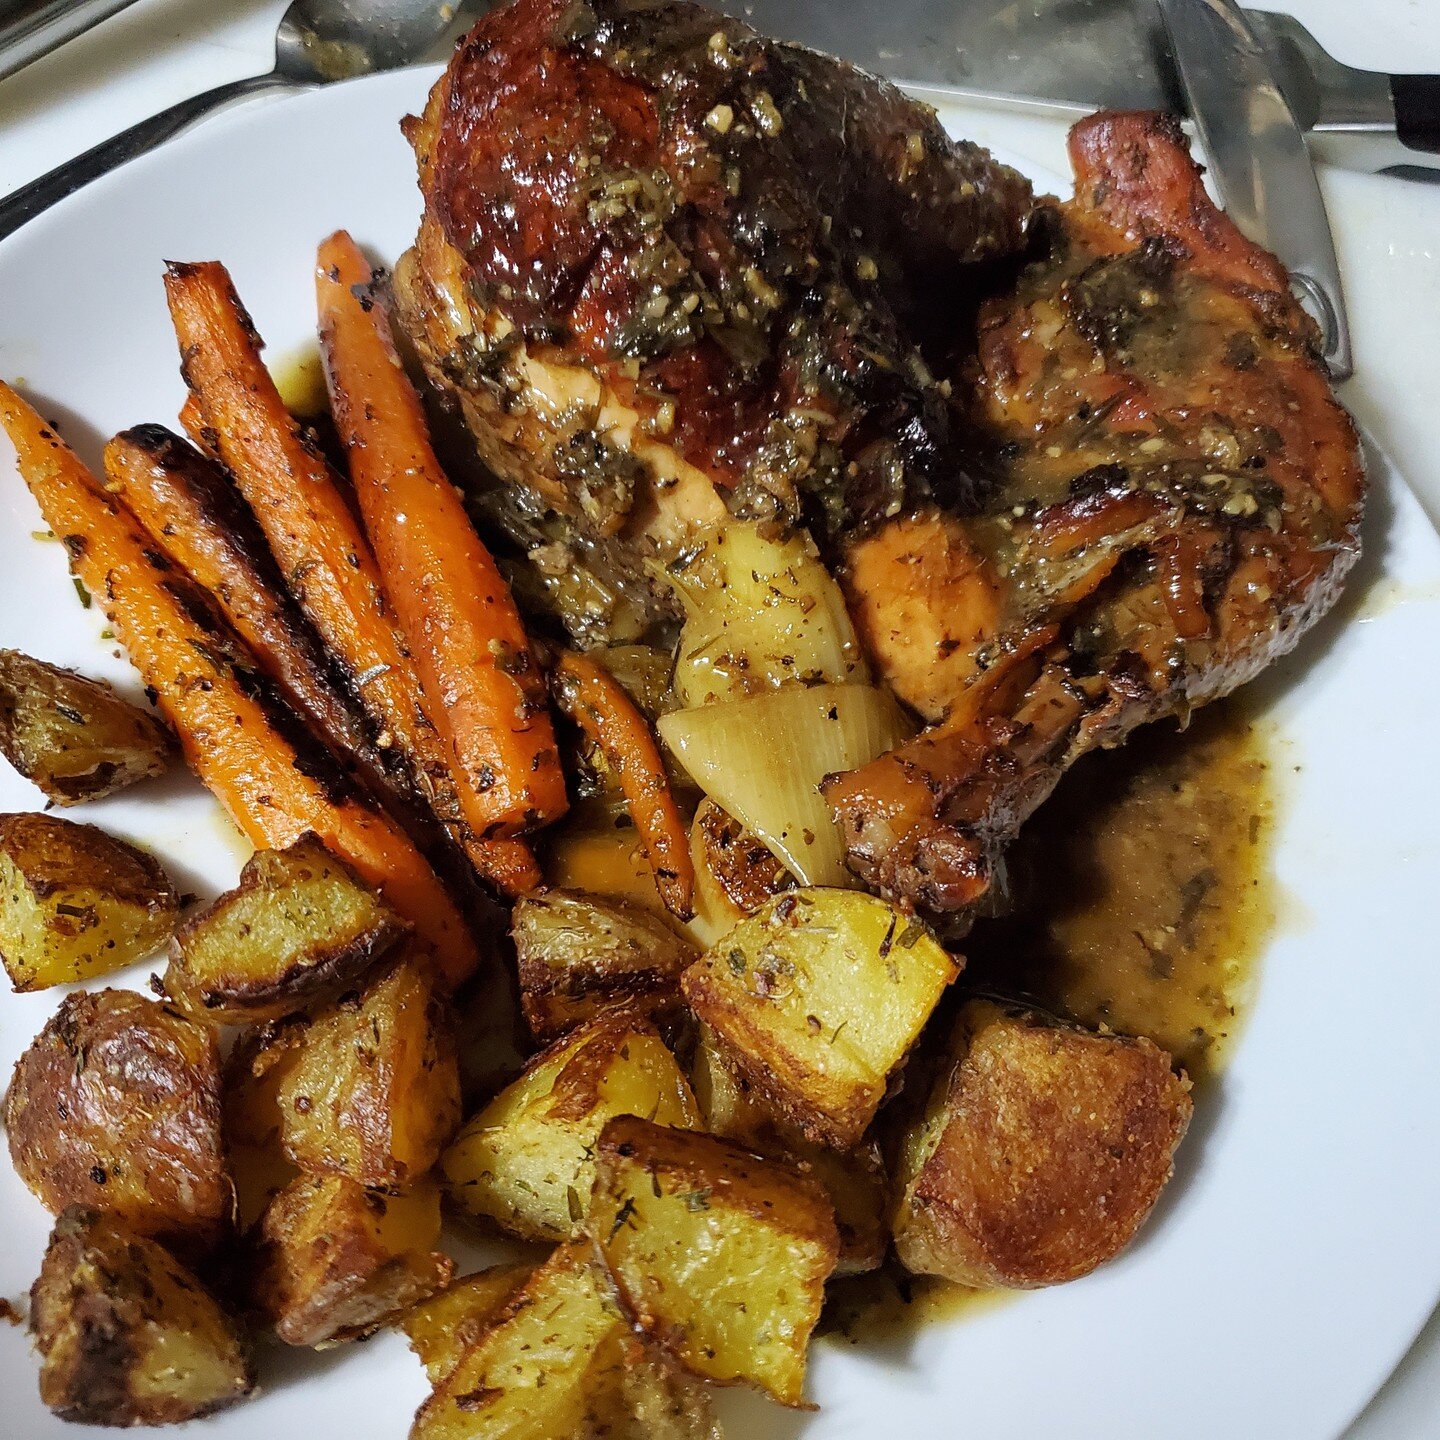 Roasted Chicken and white wine gravy, roasted carrots and potato's All Frenched with our South of France blend! Still time to get it before Christmas! Check our bio for a link to our website.